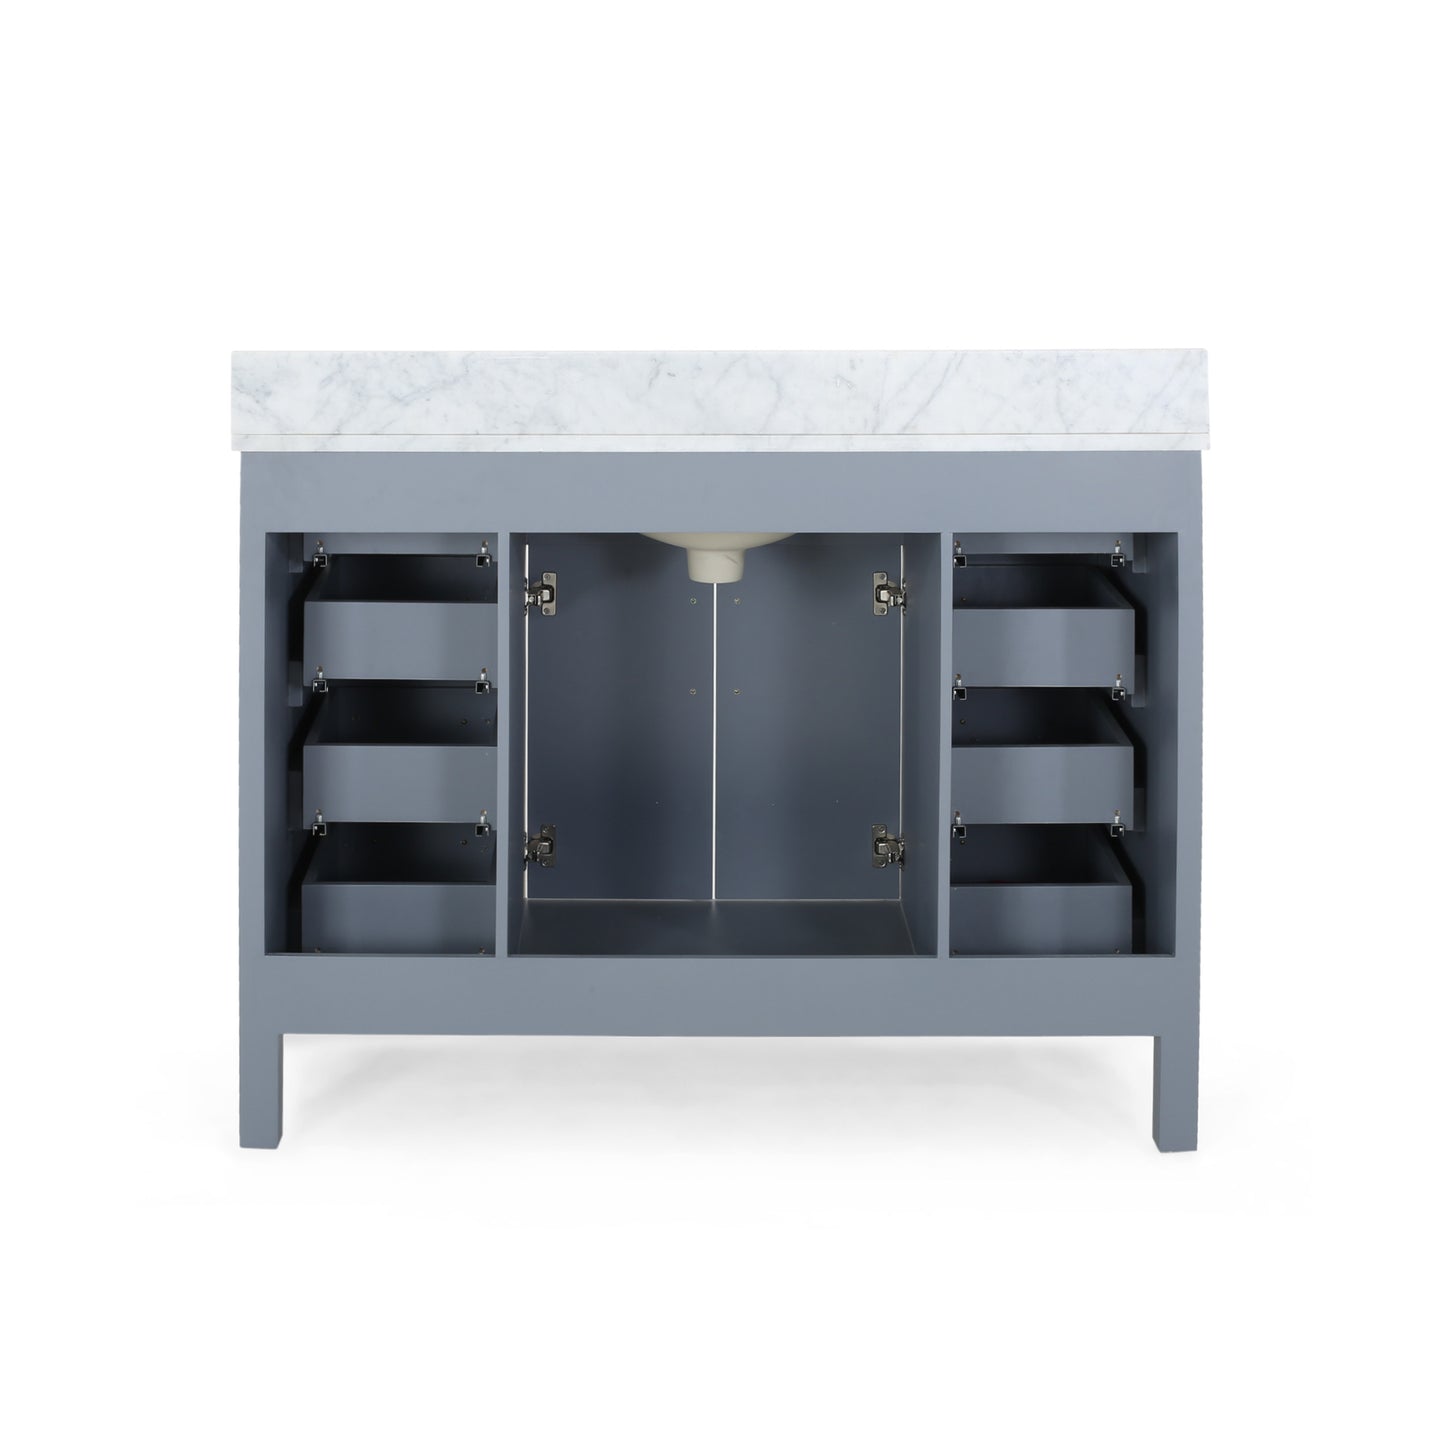 Greeley Contemporary 48" Wood Single Sink Bathroom Vanity with Marble Counter Top with Carrara White Marble